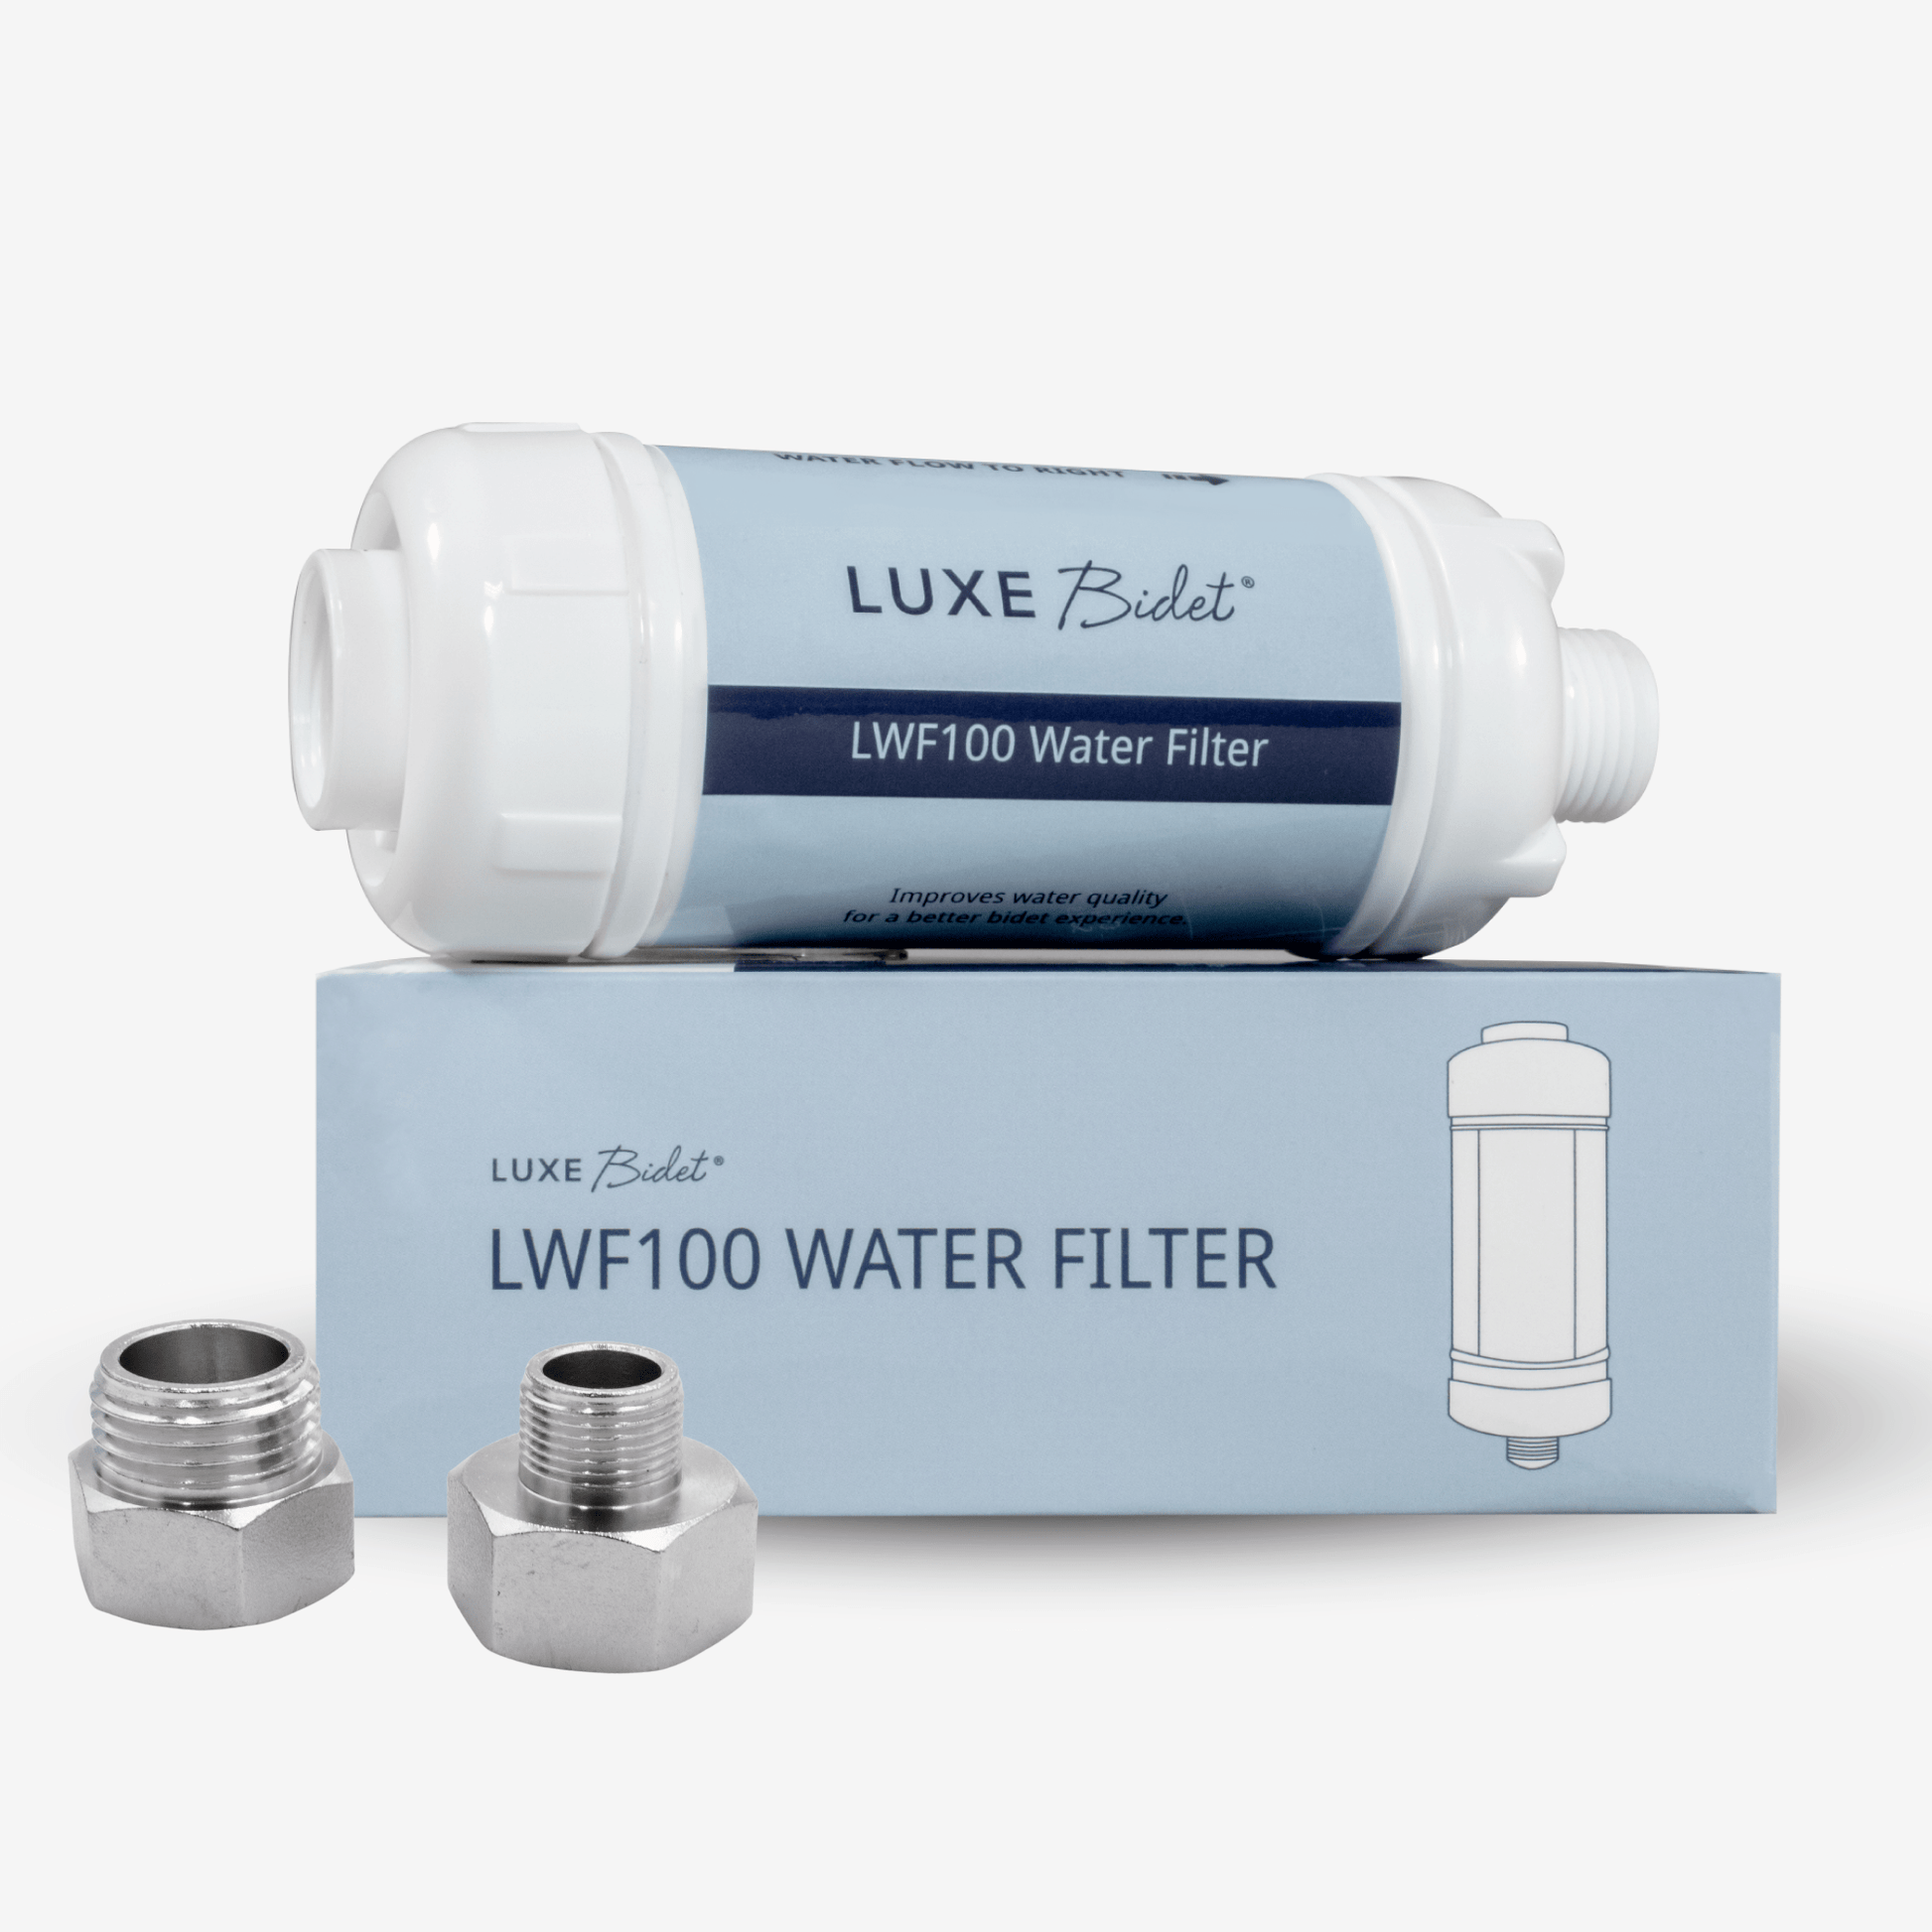 LUXE Bidet 4-in-1 Filtration Water Filter with 3/8" Metal Converters packaging